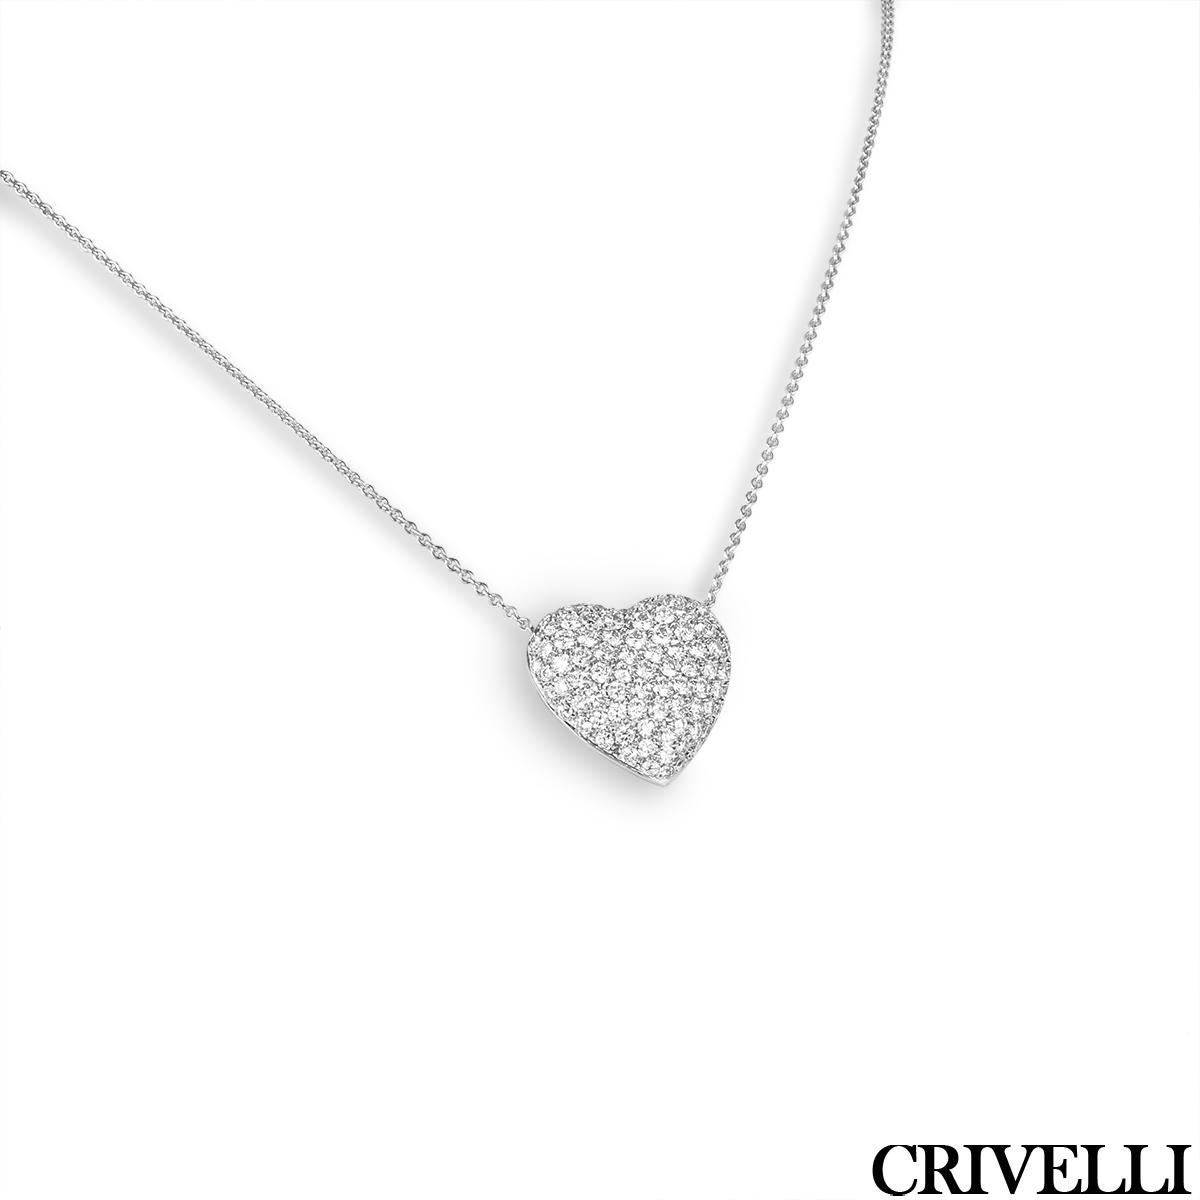 A lovely 18k white gold diamond set pendant by Crivelli. The heart motif pendant is pave set throughout with 94 round brilliant cut diamonds, with an approximate total weight of 2.34ct, E-F colour and VS clarity. The pendant is suspended evenly from